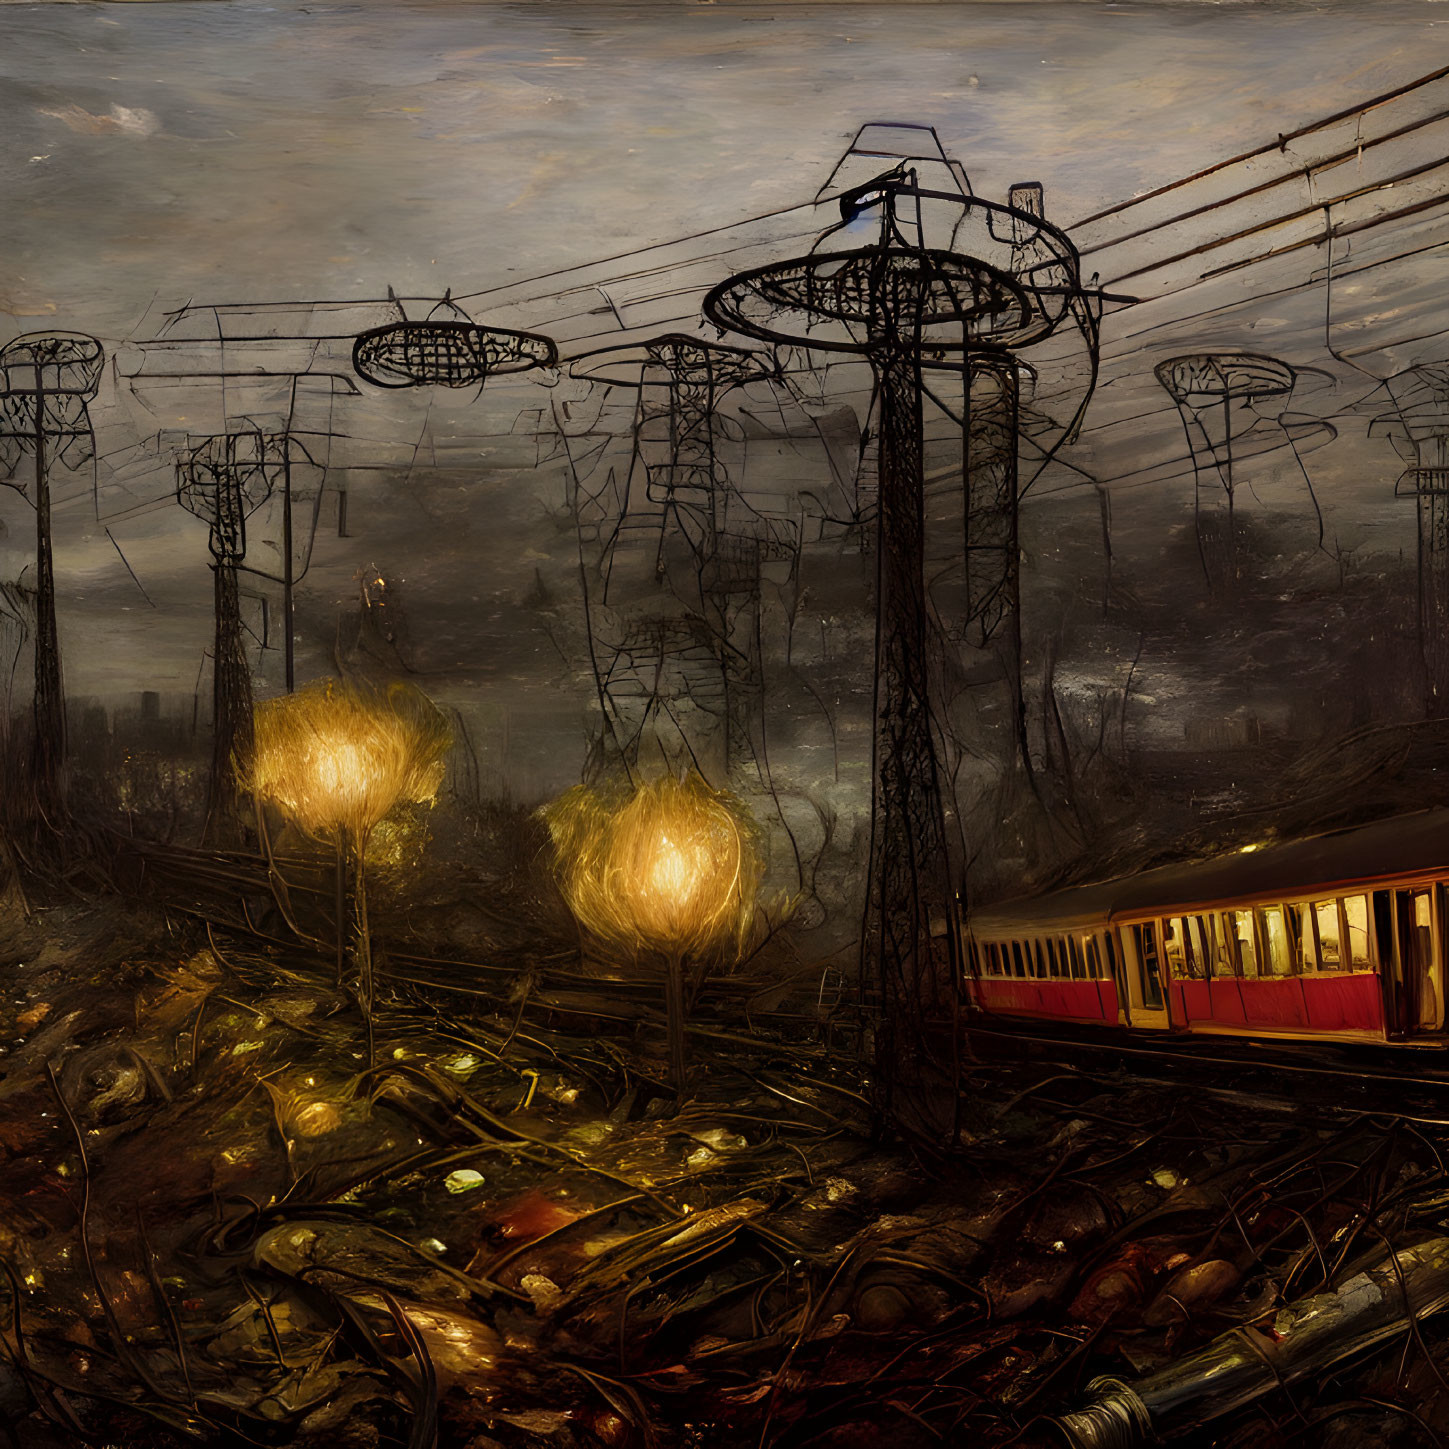 Dystopian red tram in dark landscape with car wrecks and eerie towers